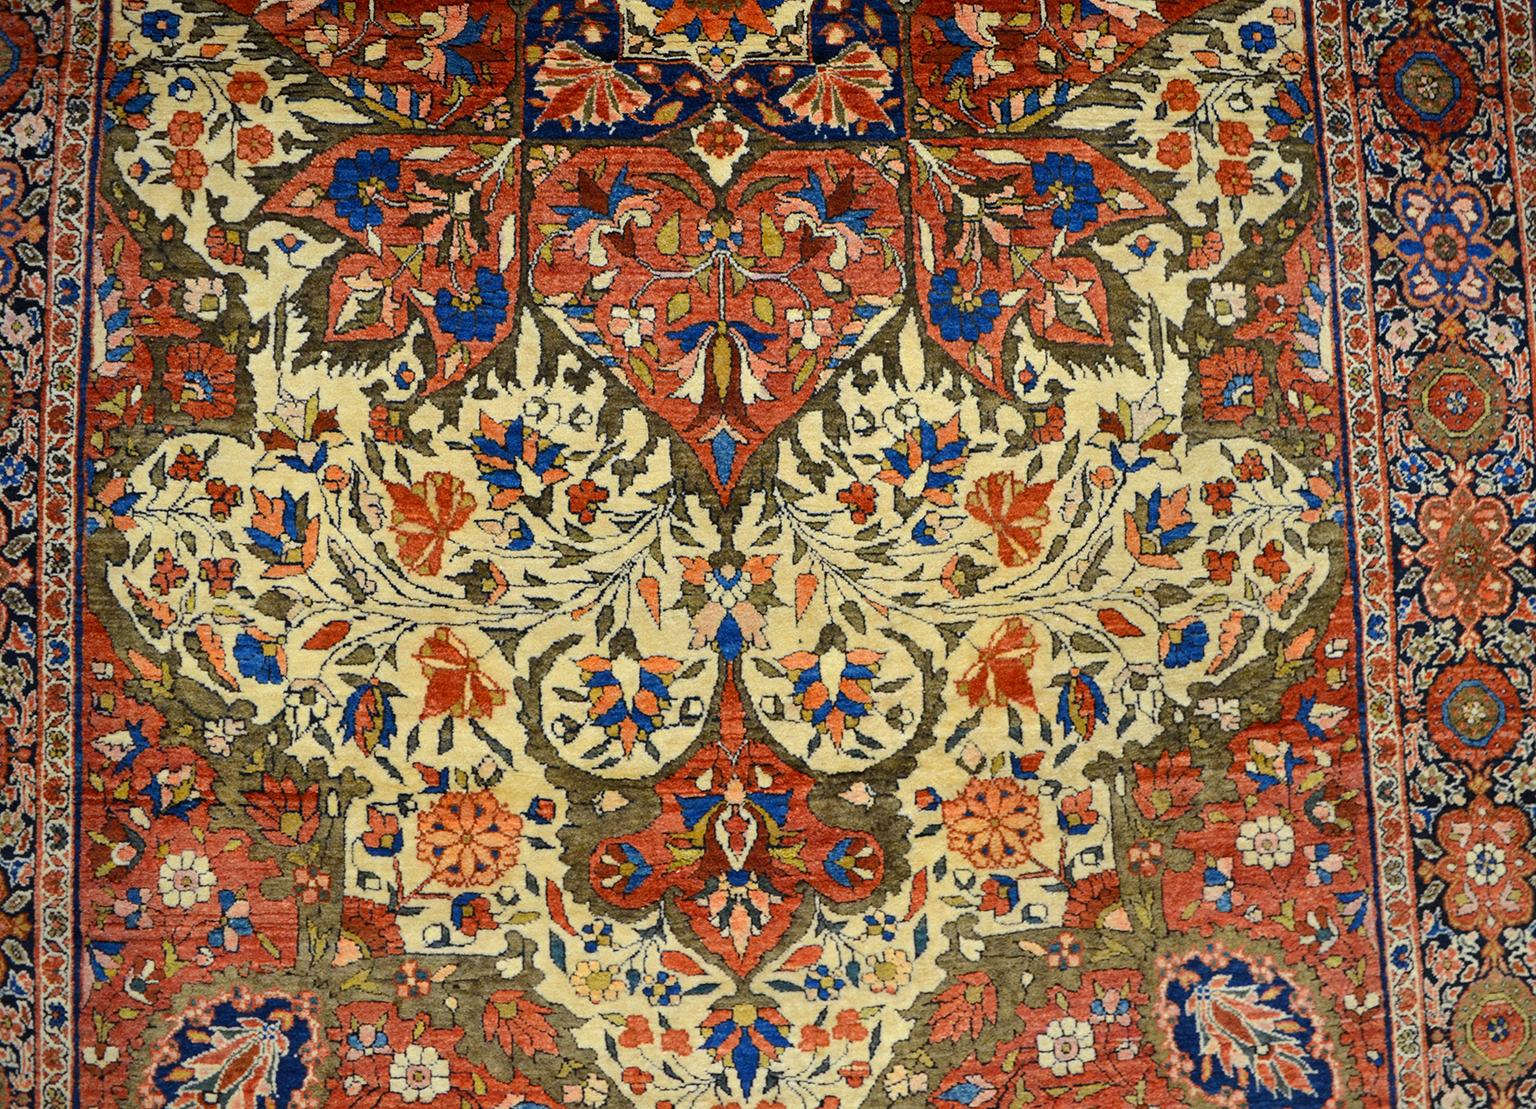 This is an antique Persian Farahan carpet dating to circa 1890 in rich hues of red, cream, and light blue in an intricate design. This carpet utilizes pure handspun wool and organic vegetable dyes, it measures 4'1